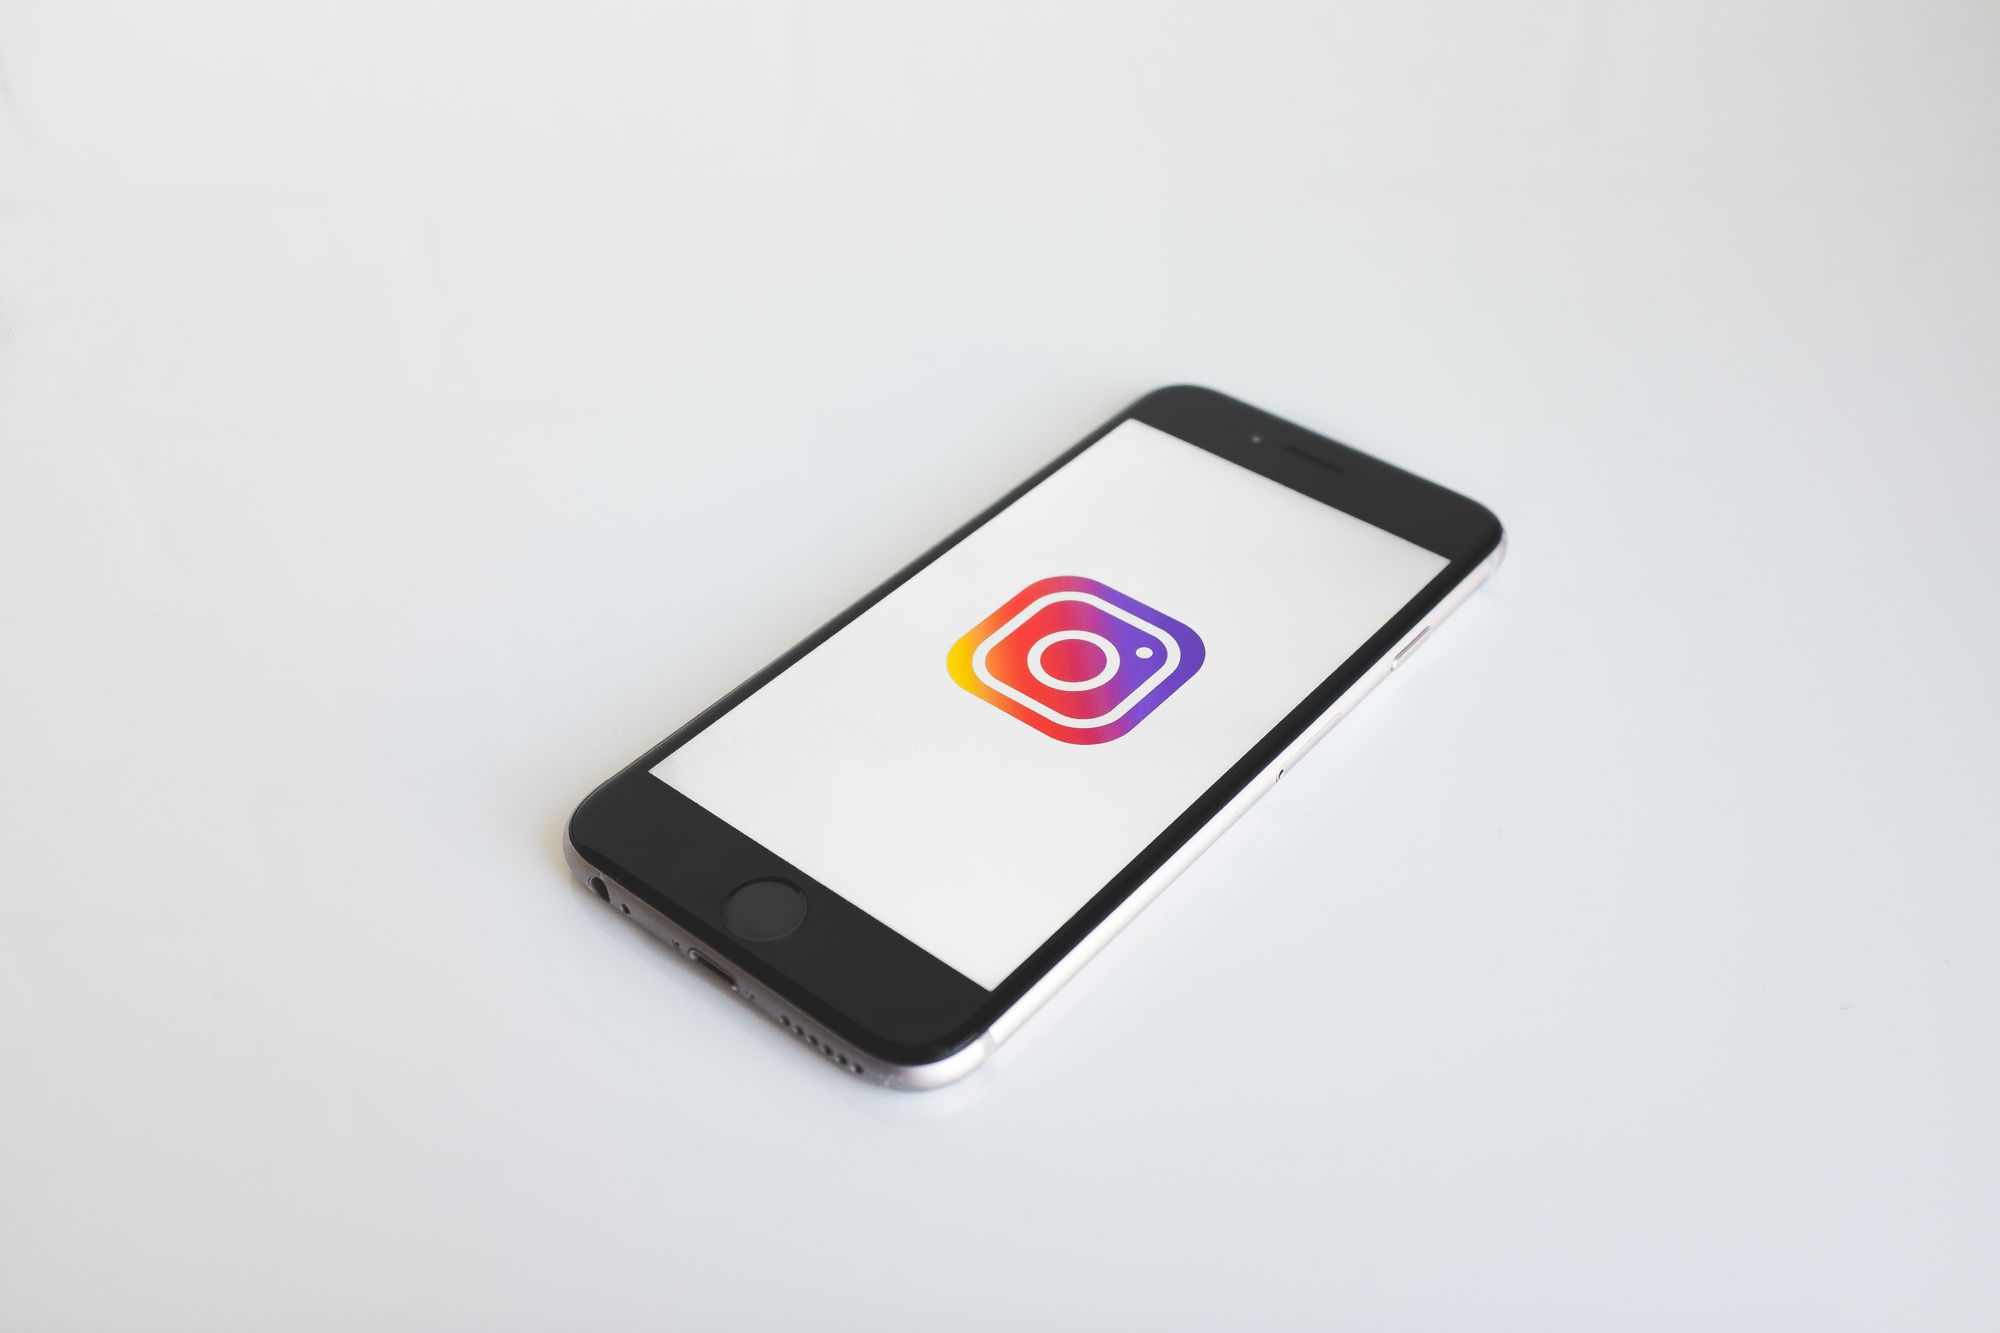 How to Verify an Instagram Account: A Step-By-Step Guide